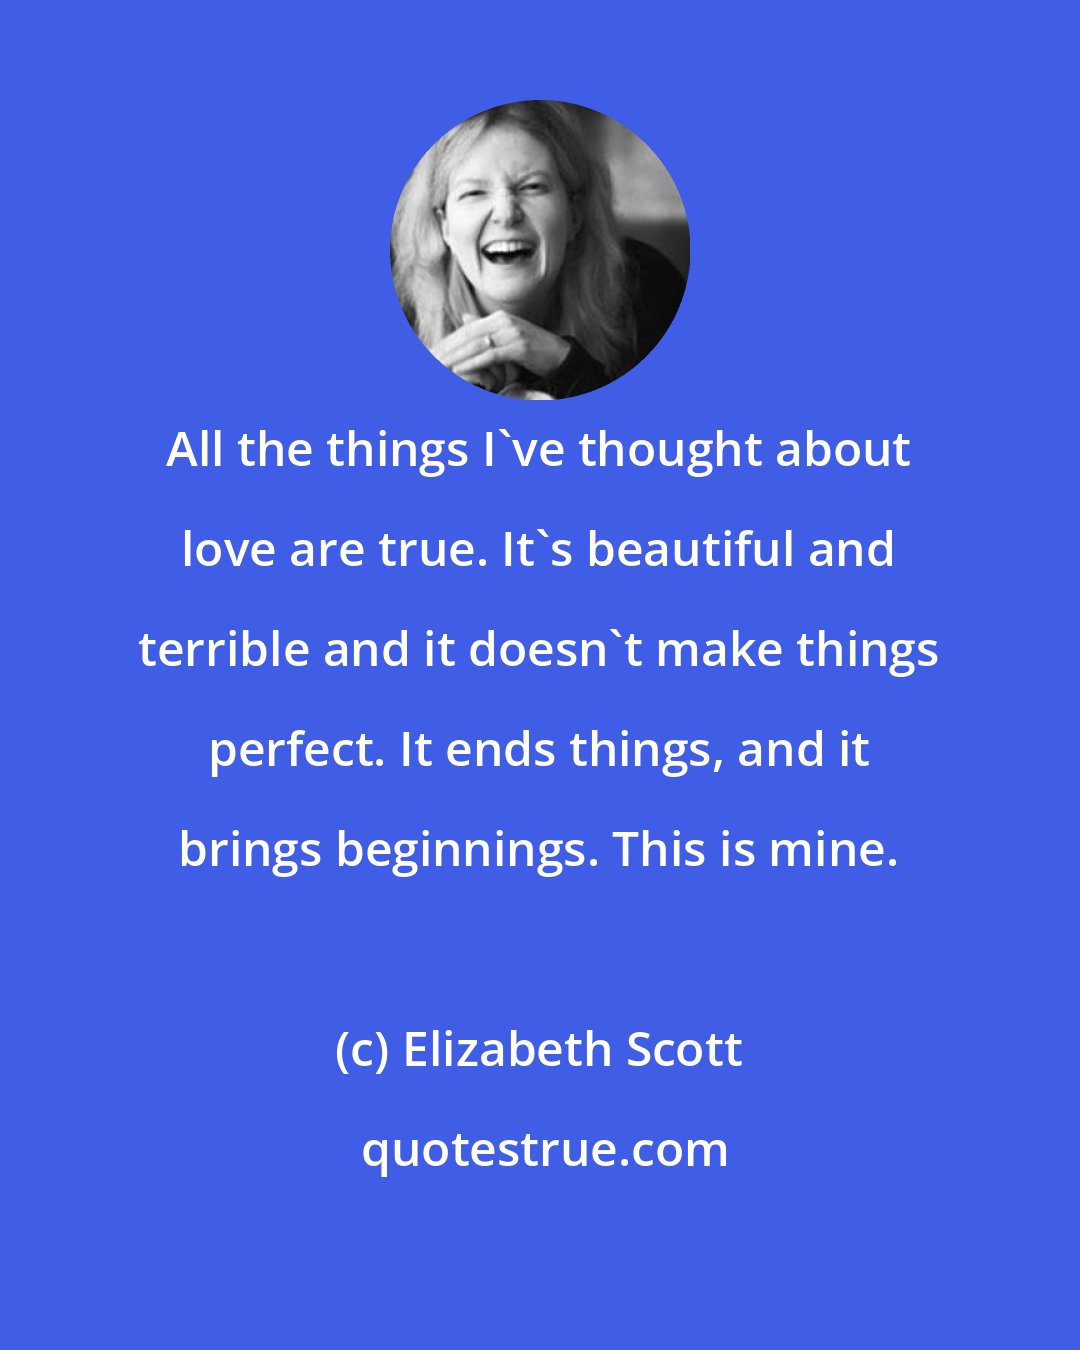 Elizabeth Scott: All the things I've thought about love are true. It's beautiful and terrible and it doesn't make things perfect. It ends things, and it brings beginnings. This is mine.